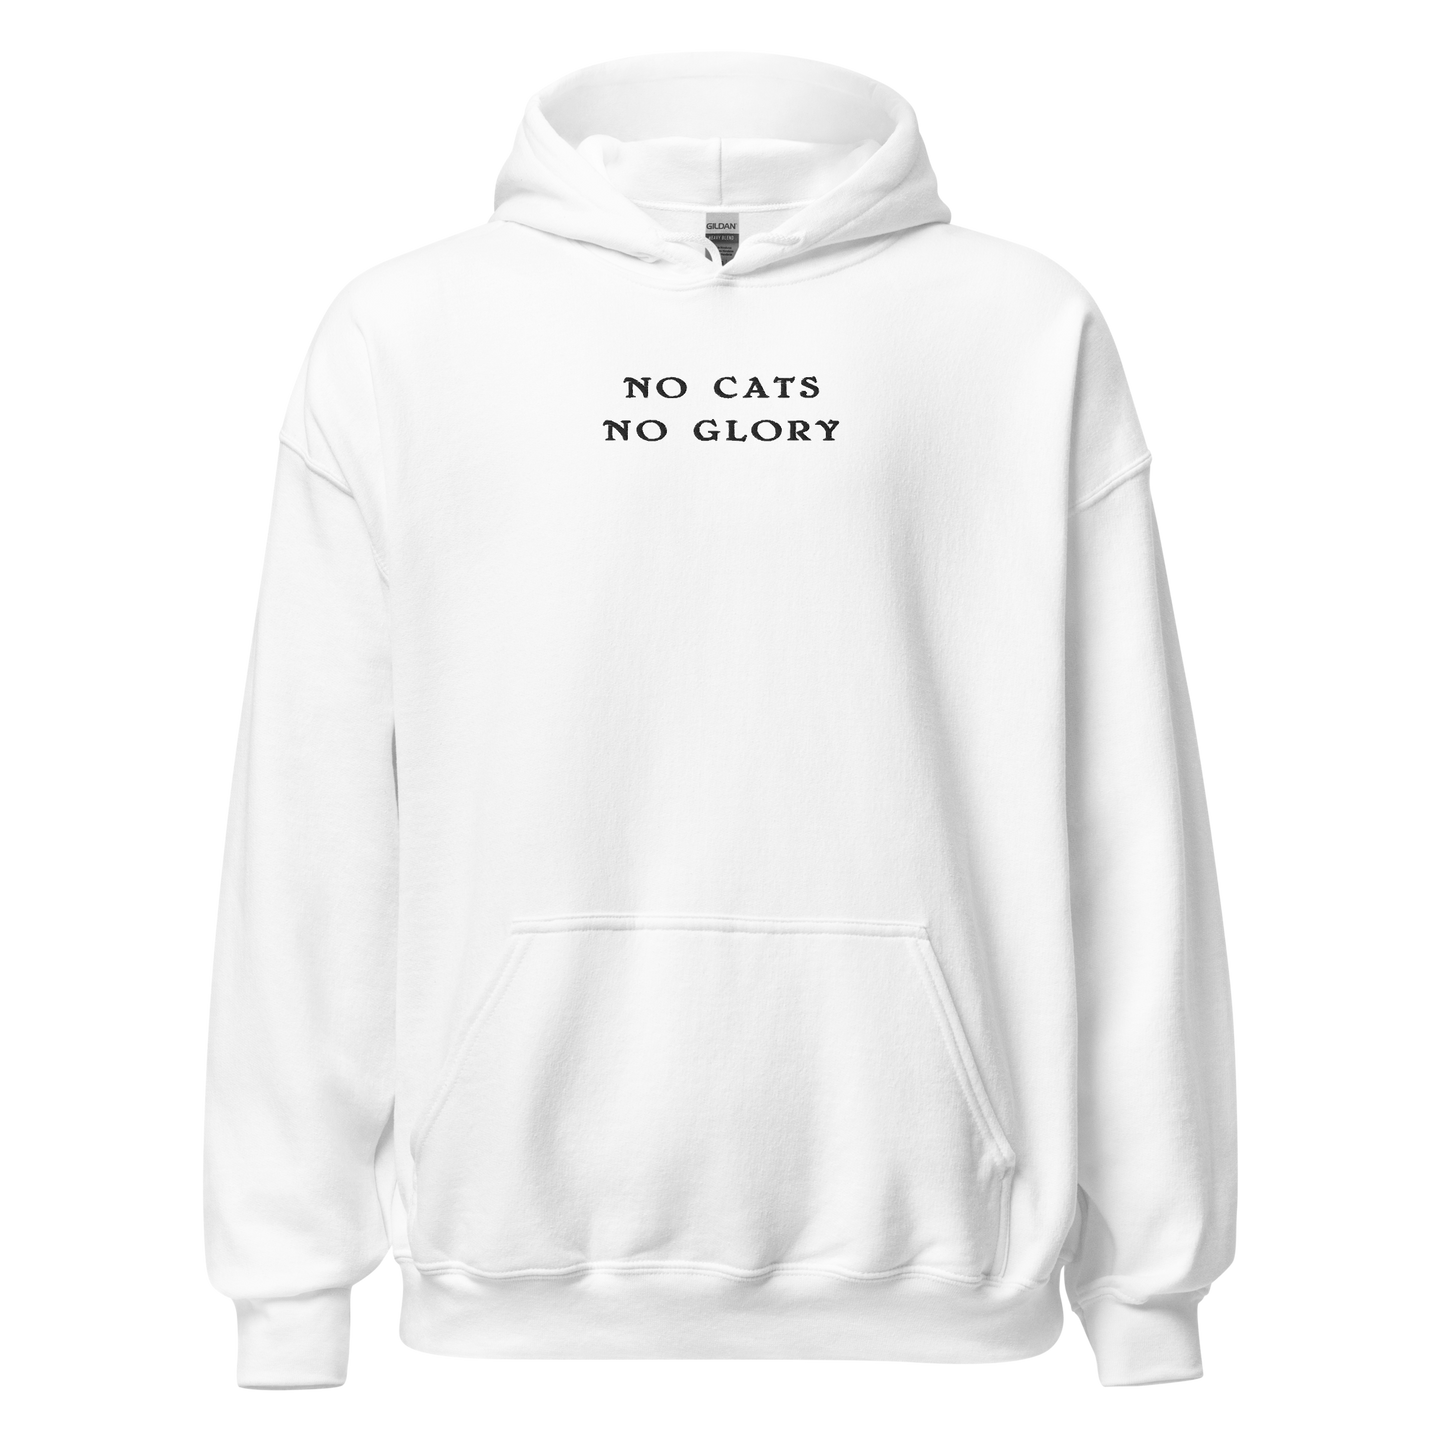 Unisex Hoodie - "No Cats No Glory"  front embroidery